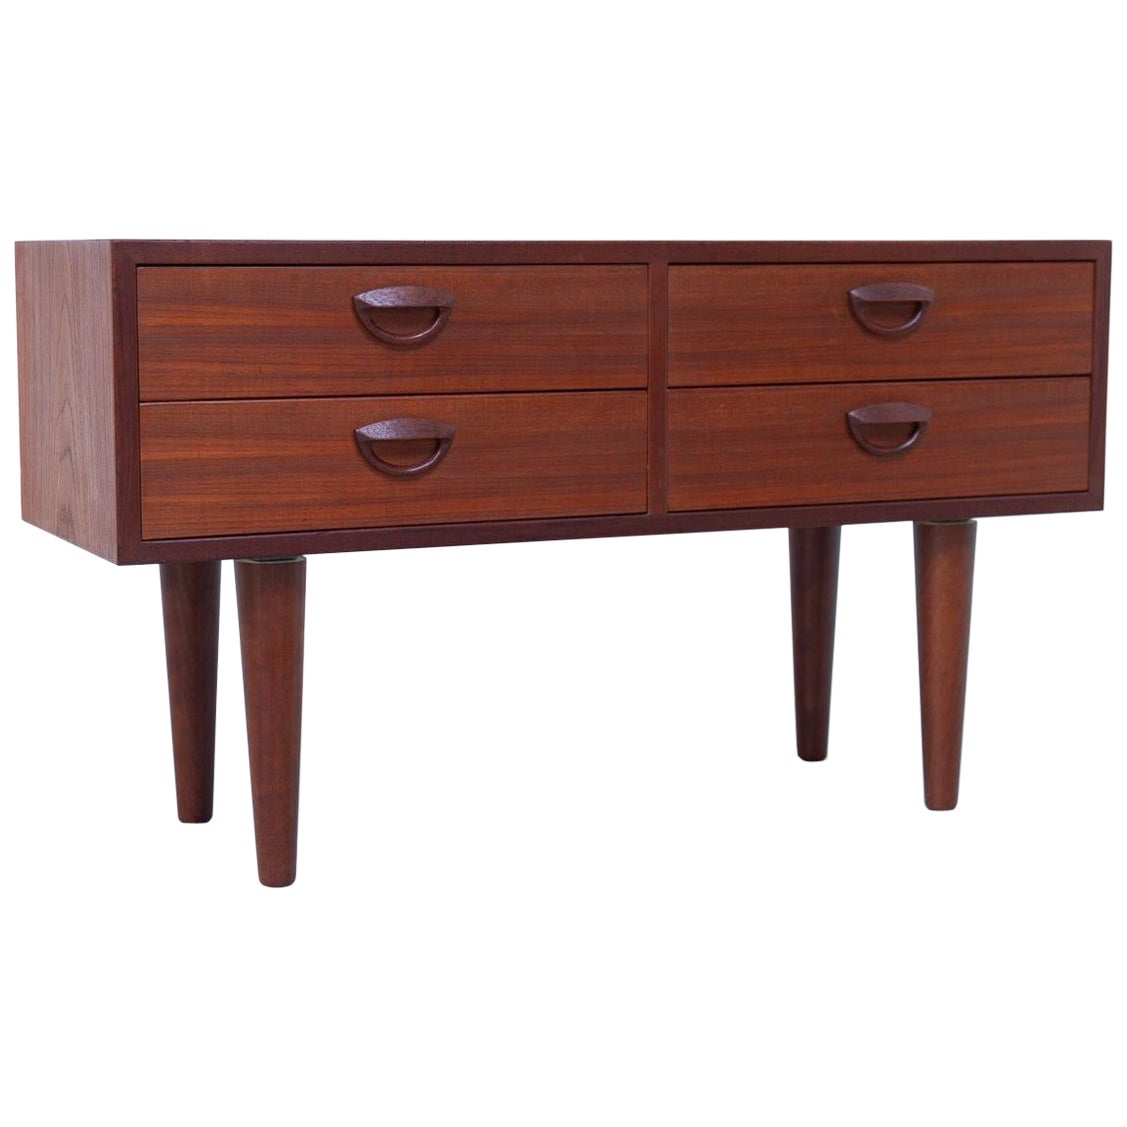 Small Danish Teak Chest of Drawers by Kai Kristiansen for FM, 1960s. For Sale